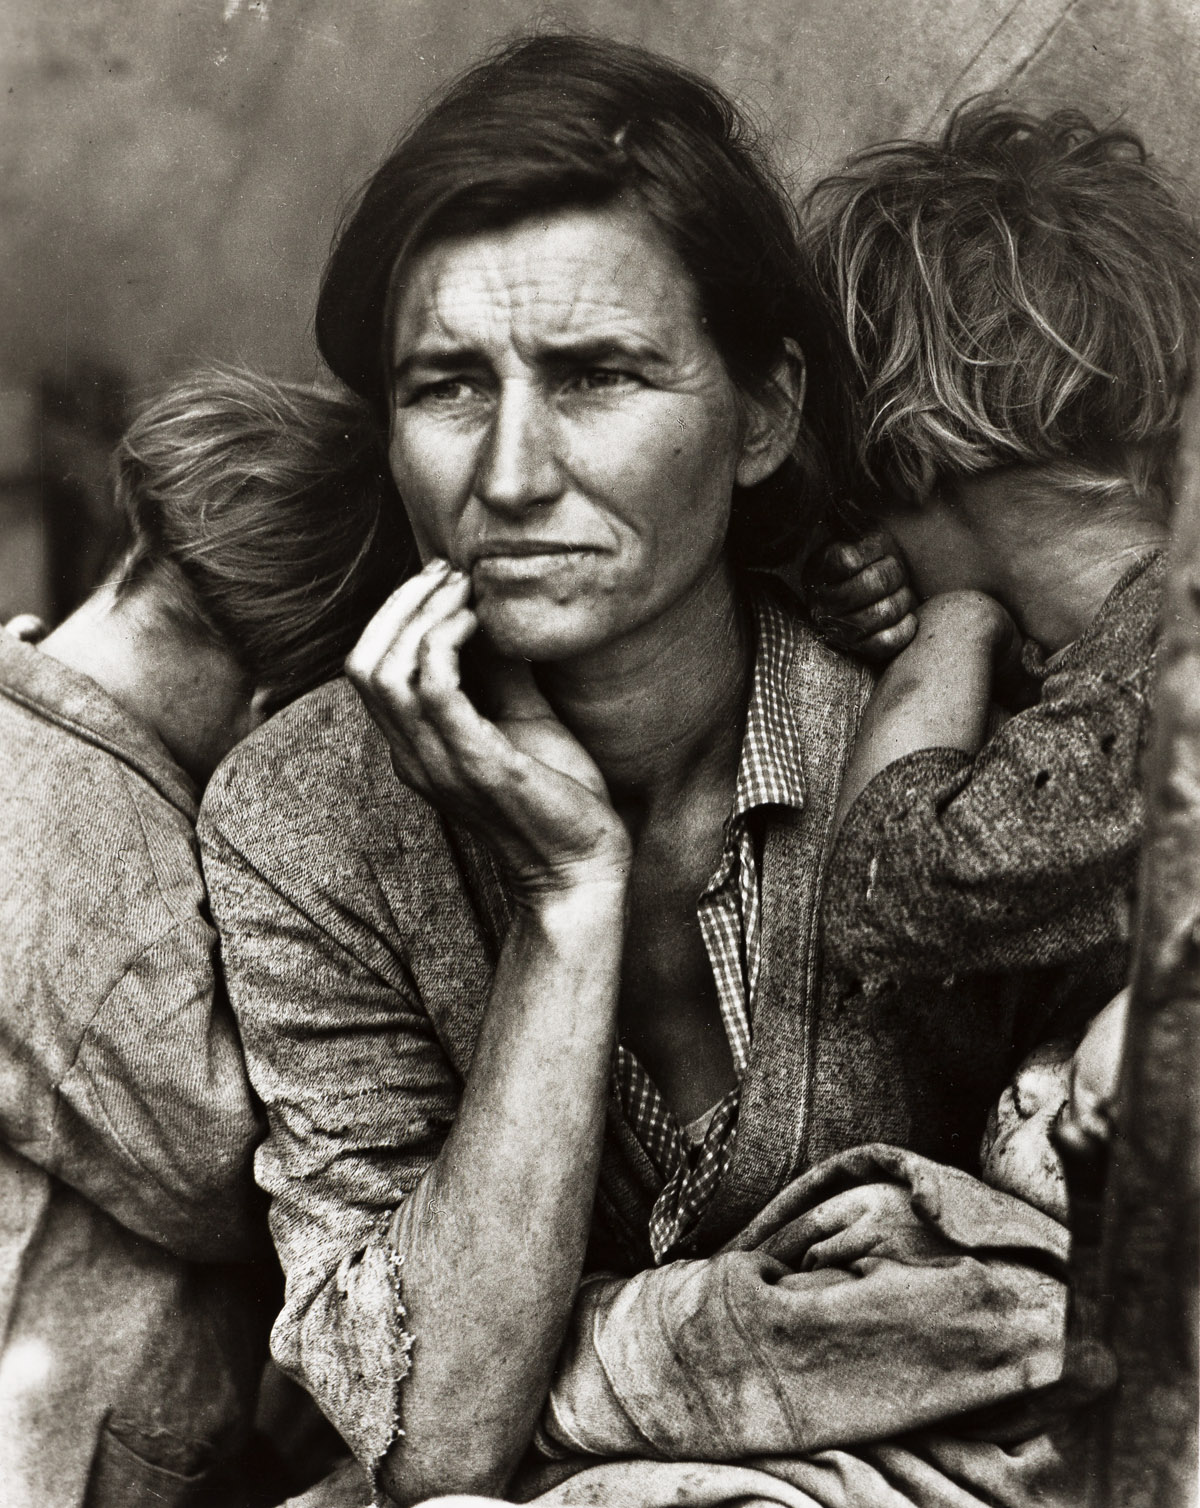 (FARM SECURITY ADMINISTRATION) A portfolio of 10 F.S.A. photographs, including images by Dorothea Lange, Walker Evans, Arthur Rothstein